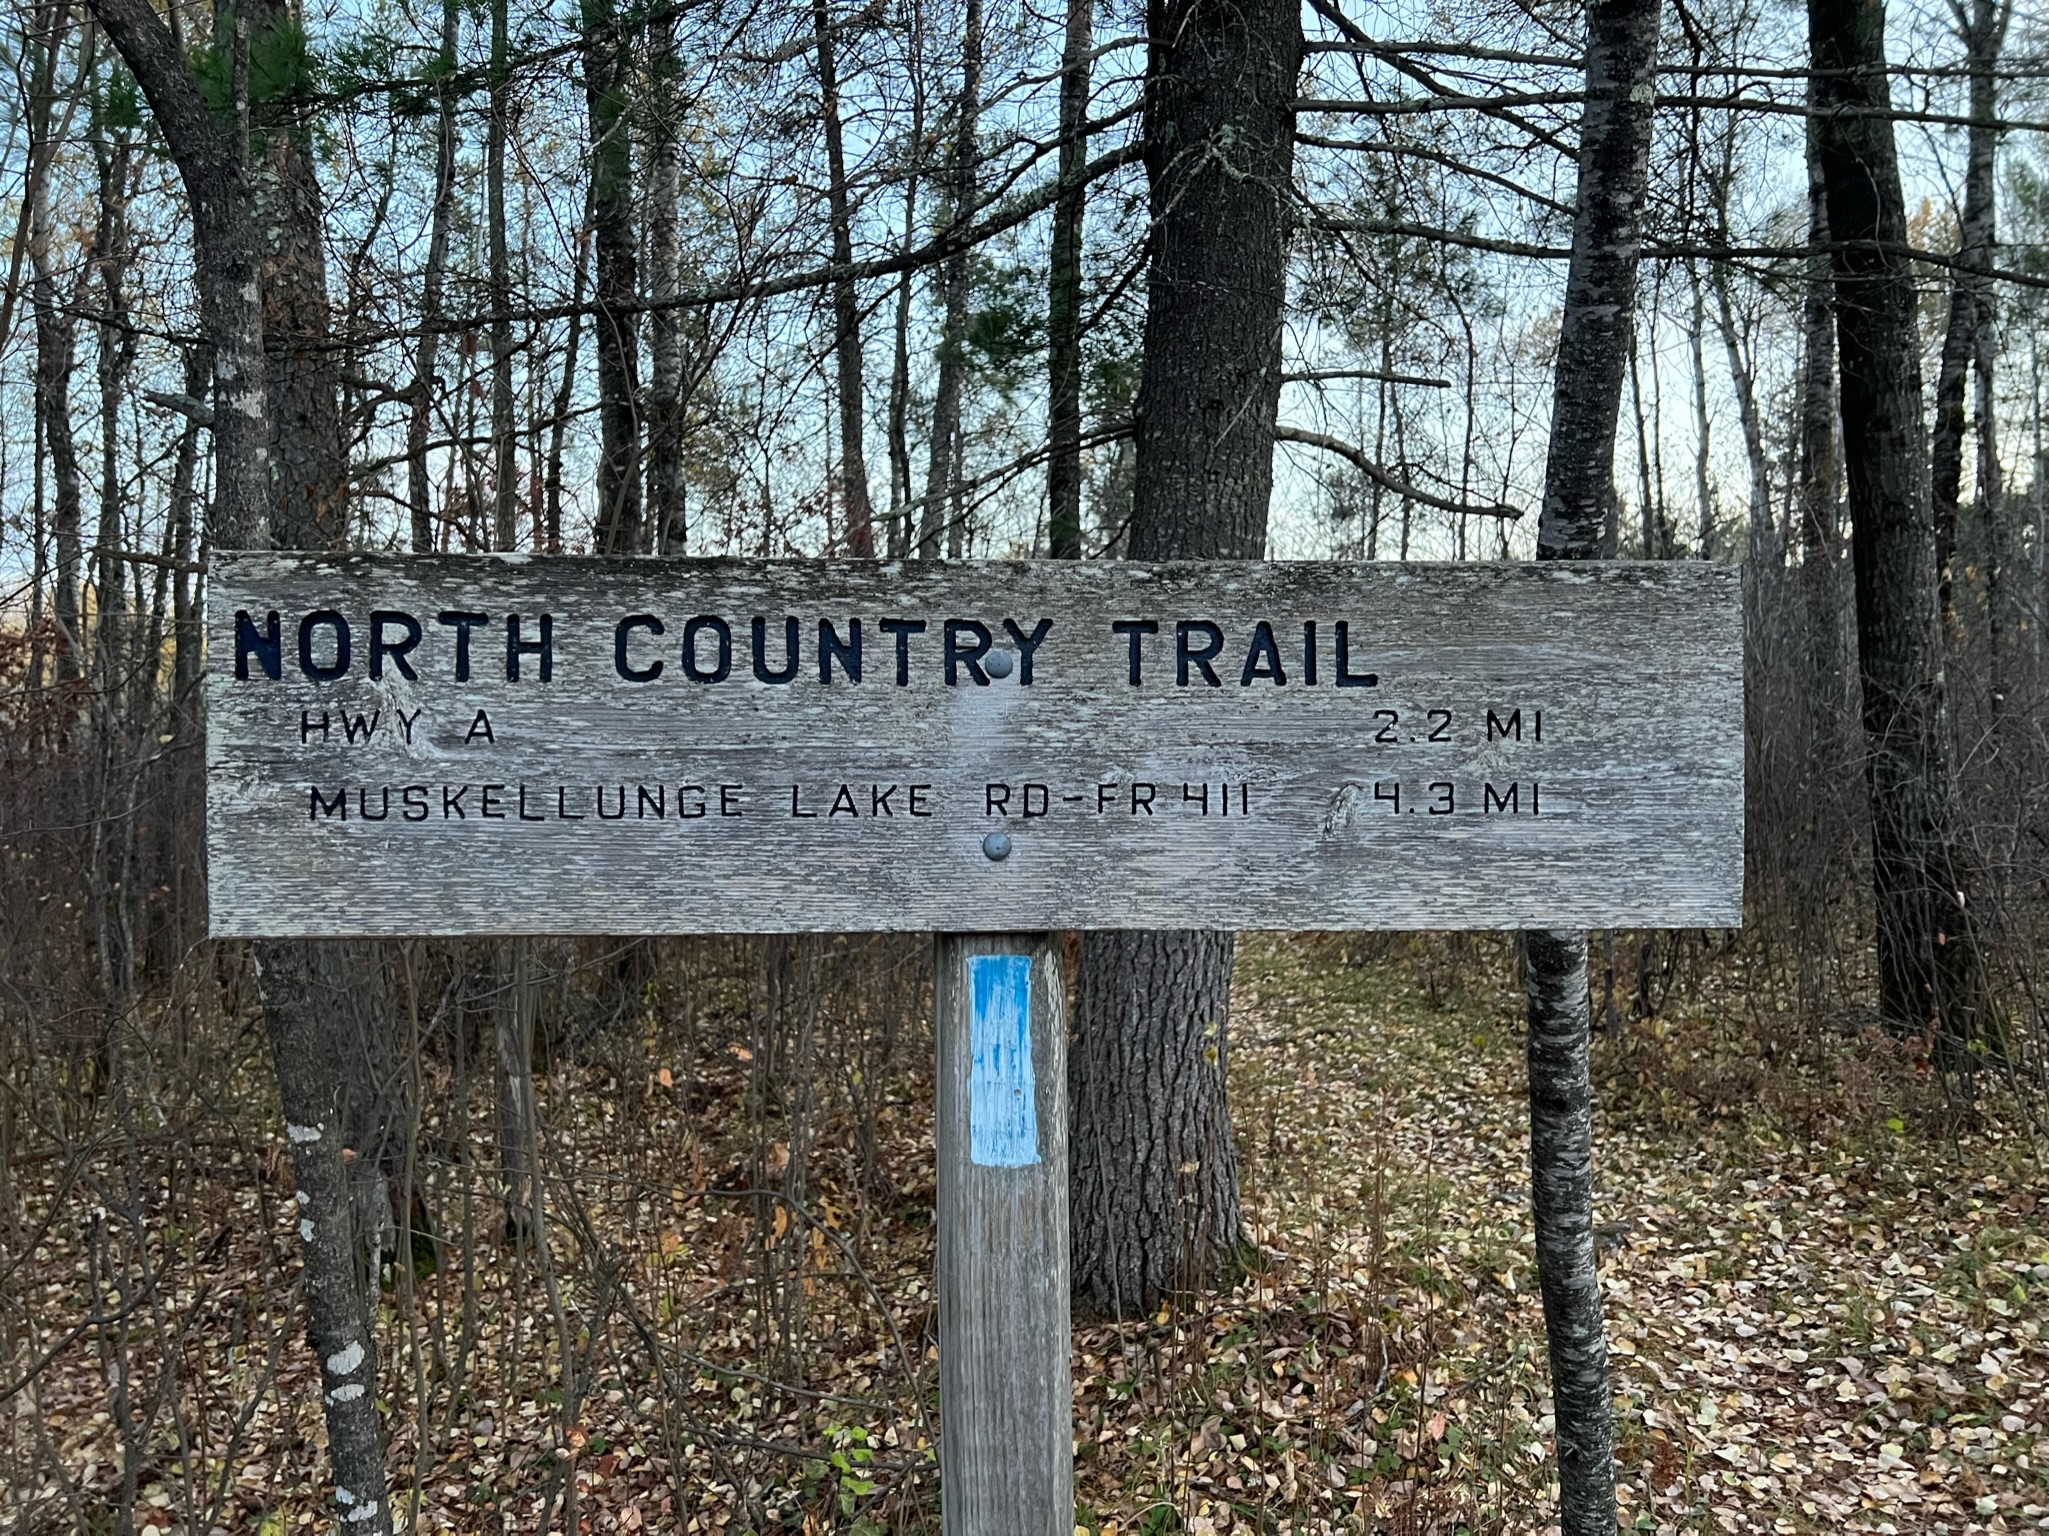 The North Country National Scenic Trail is marked with segment signs and blue blazes.